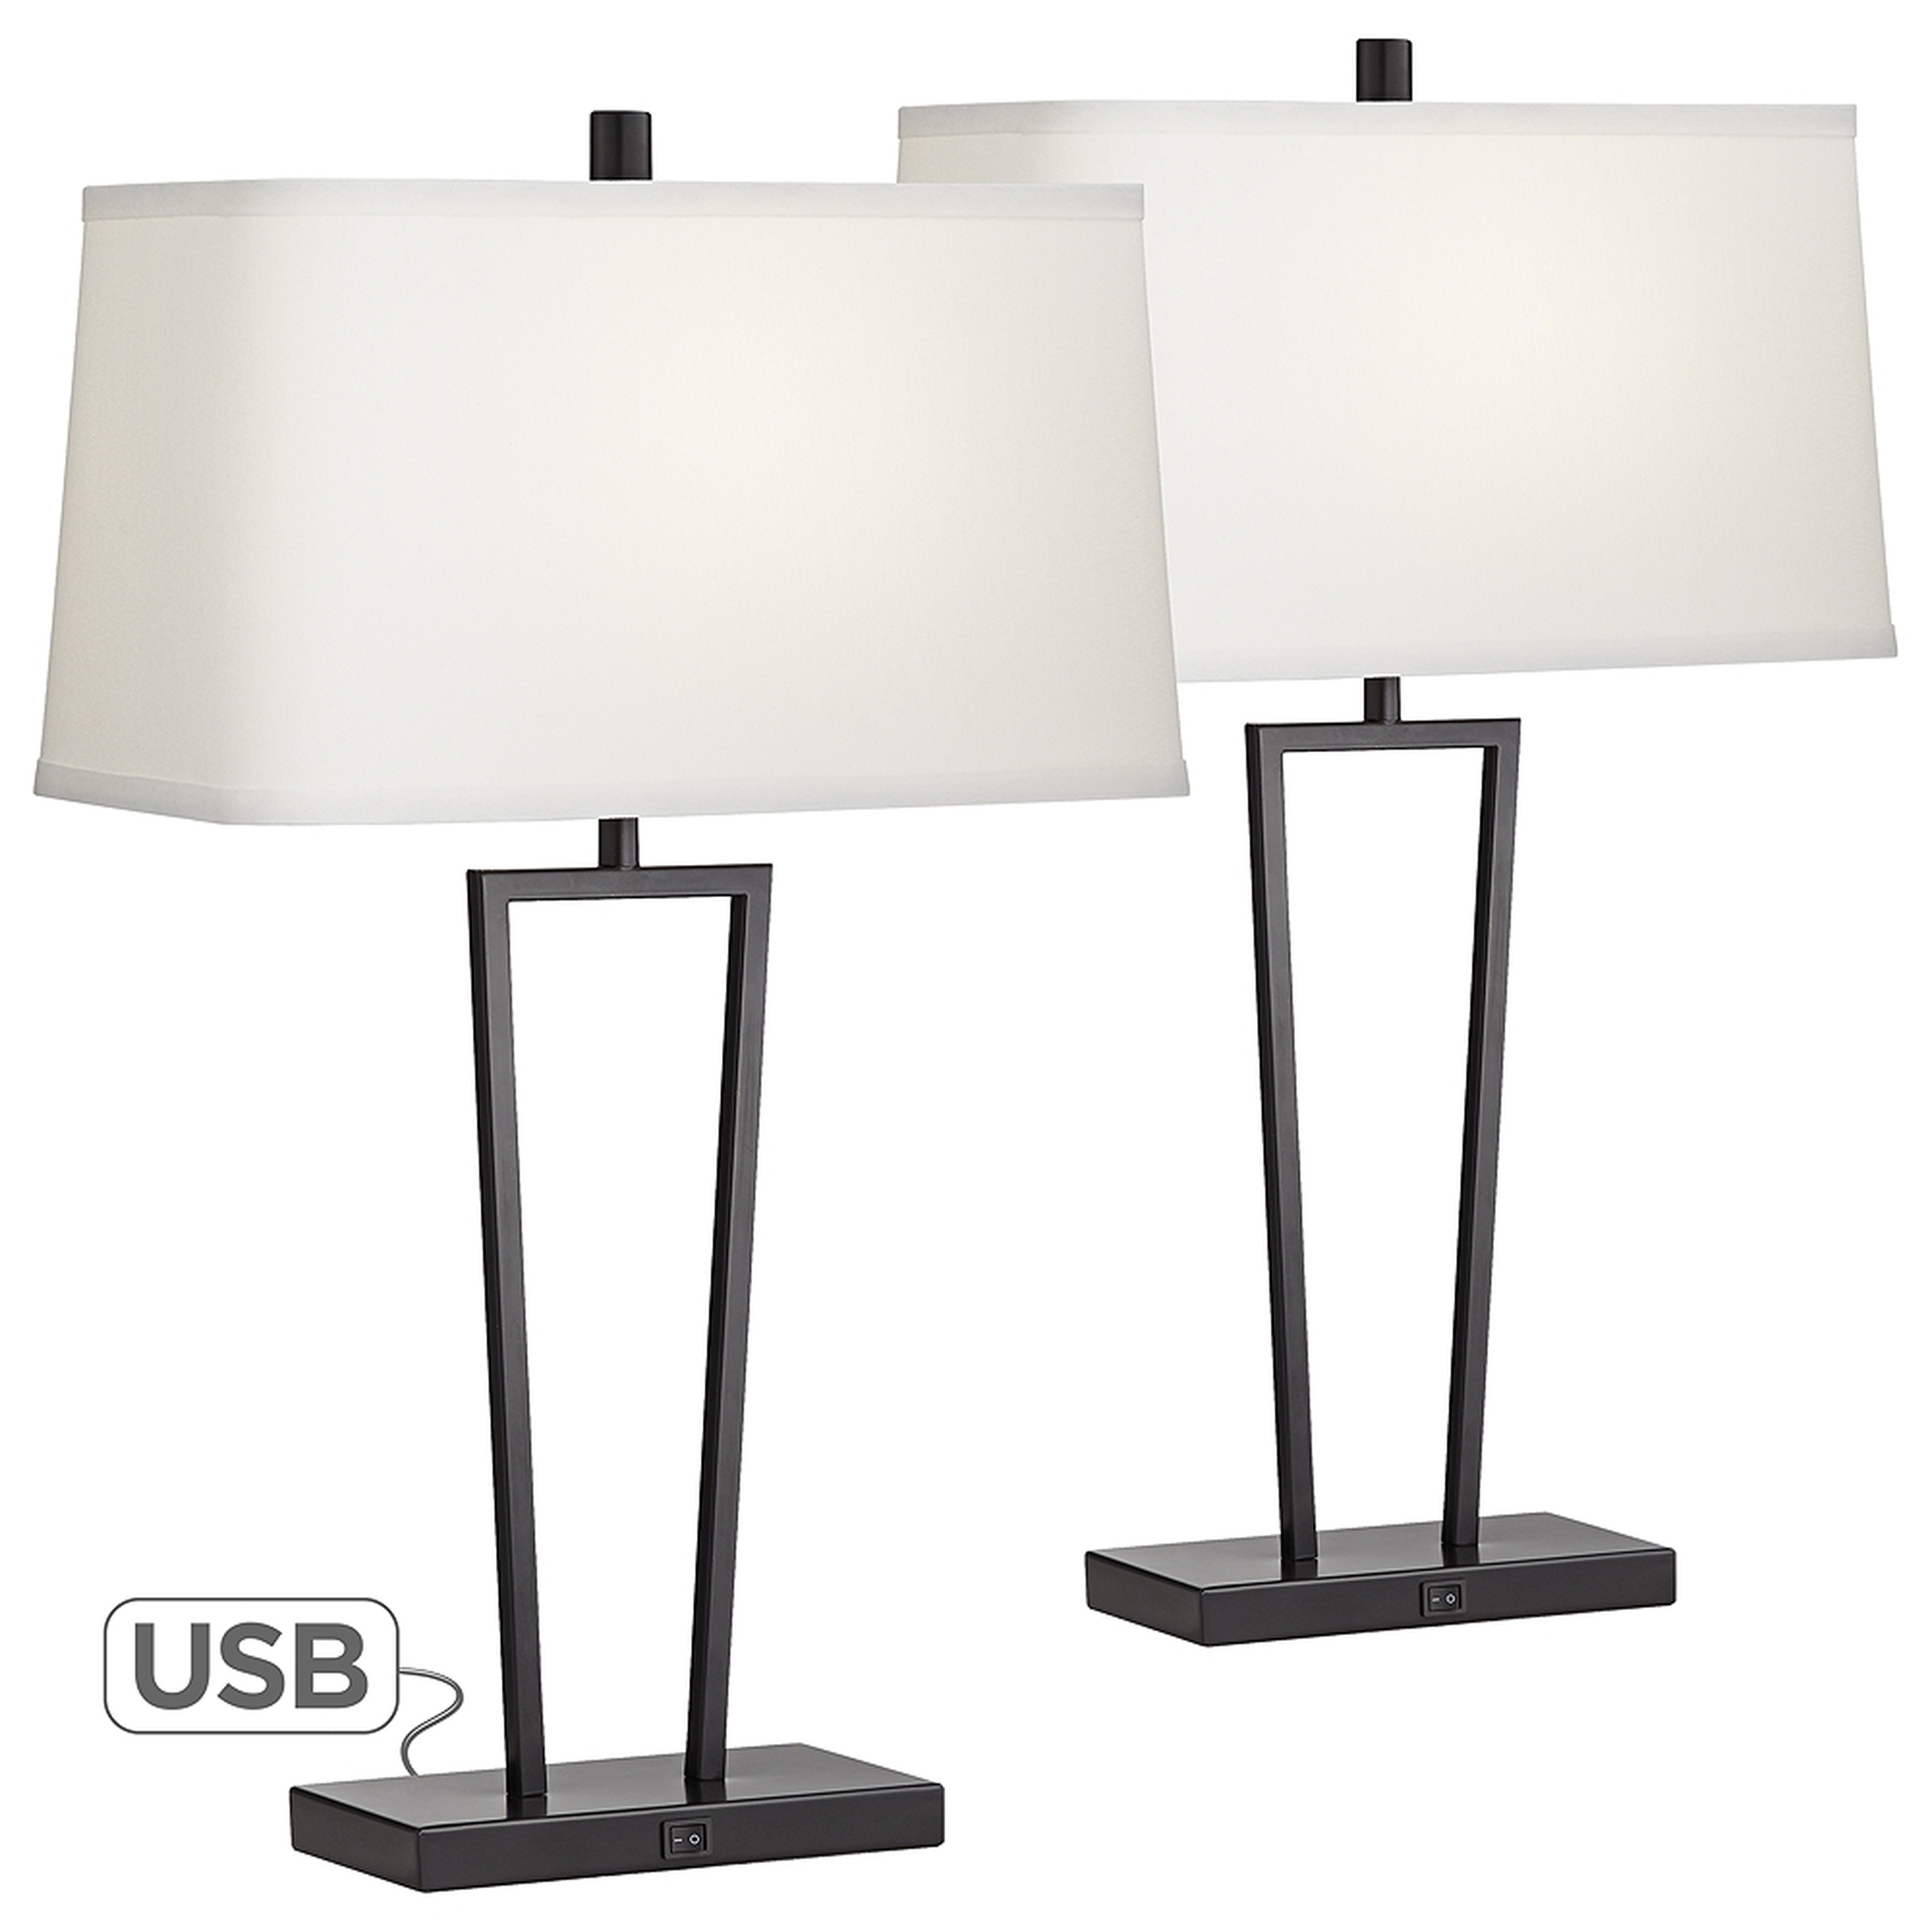 Cole Black Metal Table Lamps with USB Port Set of 2 - Lamps Plus